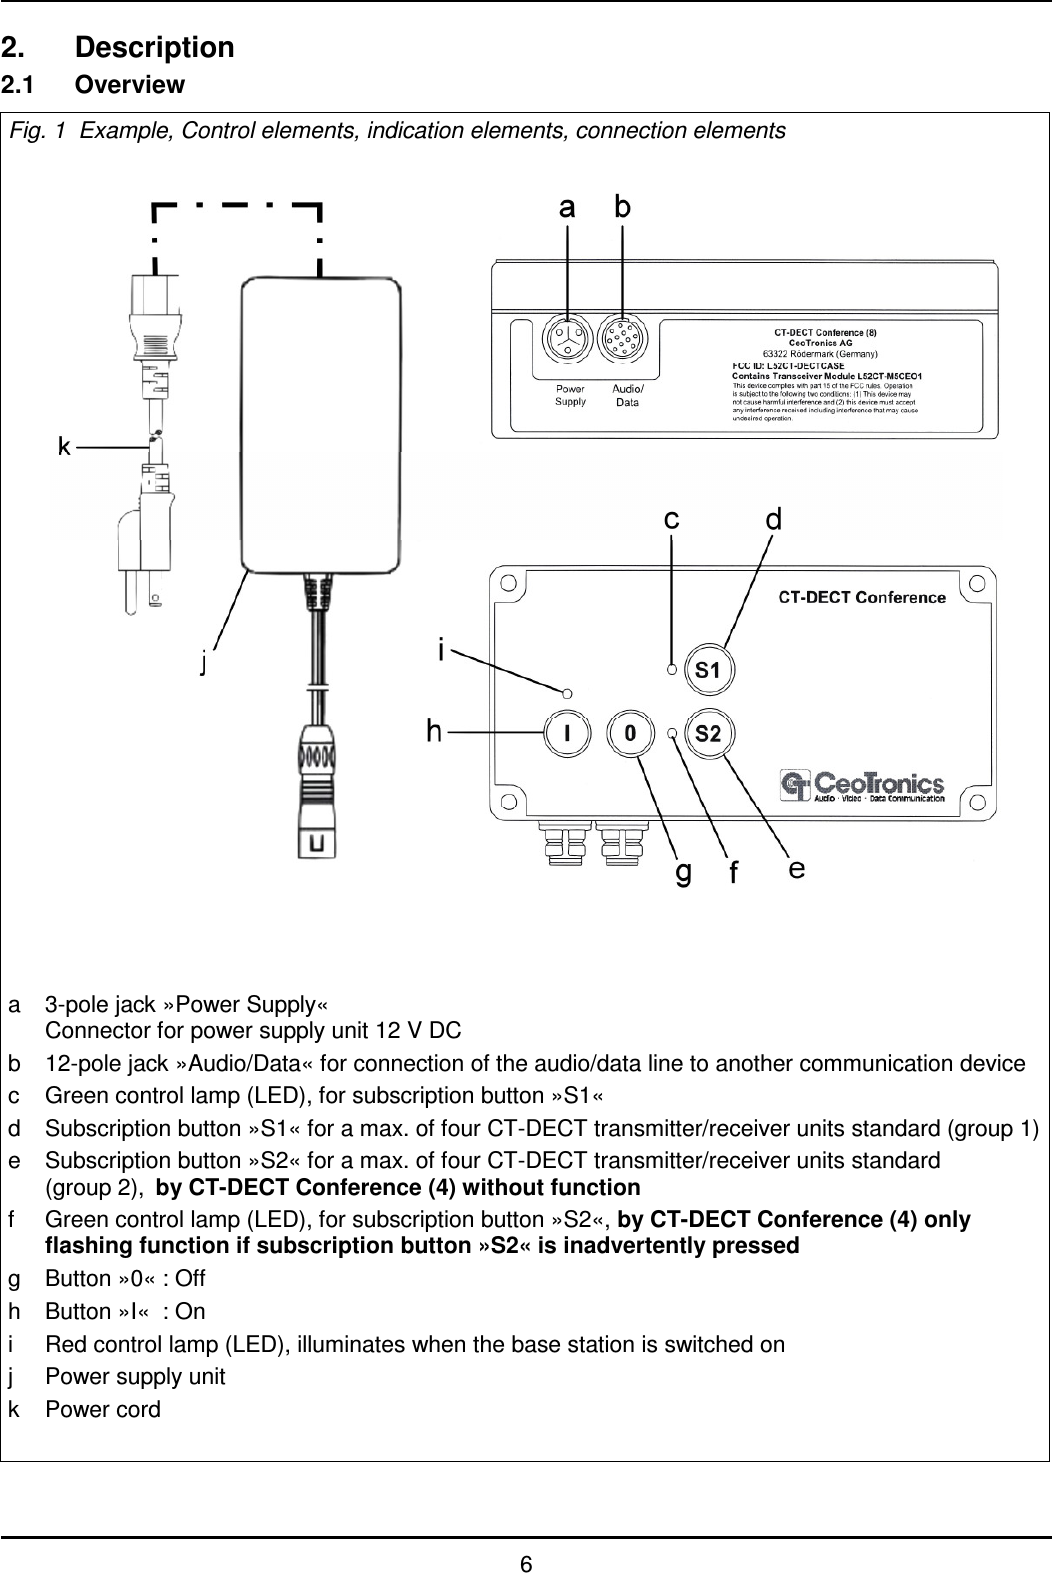   6 2.  Description 2.1  Overview Fig. 1  Example, Control elements, indication elements, connection elements                        a  3-pole jack »Power Supply«   Connector for power supply unit 12 V DC b  12-pole jack »Audio/Data« for connection of the audio/data line to another communication device c  Green control lamp (LED), for subscription button »S1« d  Subscription button »S1« for a max. of four CT-DECT transmitter/receiver units standard (group 1) e  Subscription button »S2« for a max. of four CT-DECT transmitter/receiver units standard    (group 2),  by CT-DECT Conference (4) without function f  Green control lamp (LED), for subscription button »S2«, by CT-DECT Conference (4) only  flashing function if subscription button »S2« is inadvertently pressed  g  Button »0« : Off h  Button »I«  : On i  Red control lamp (LED), illuminates when the base station is switched on j  Power supply unit k  Power cord   